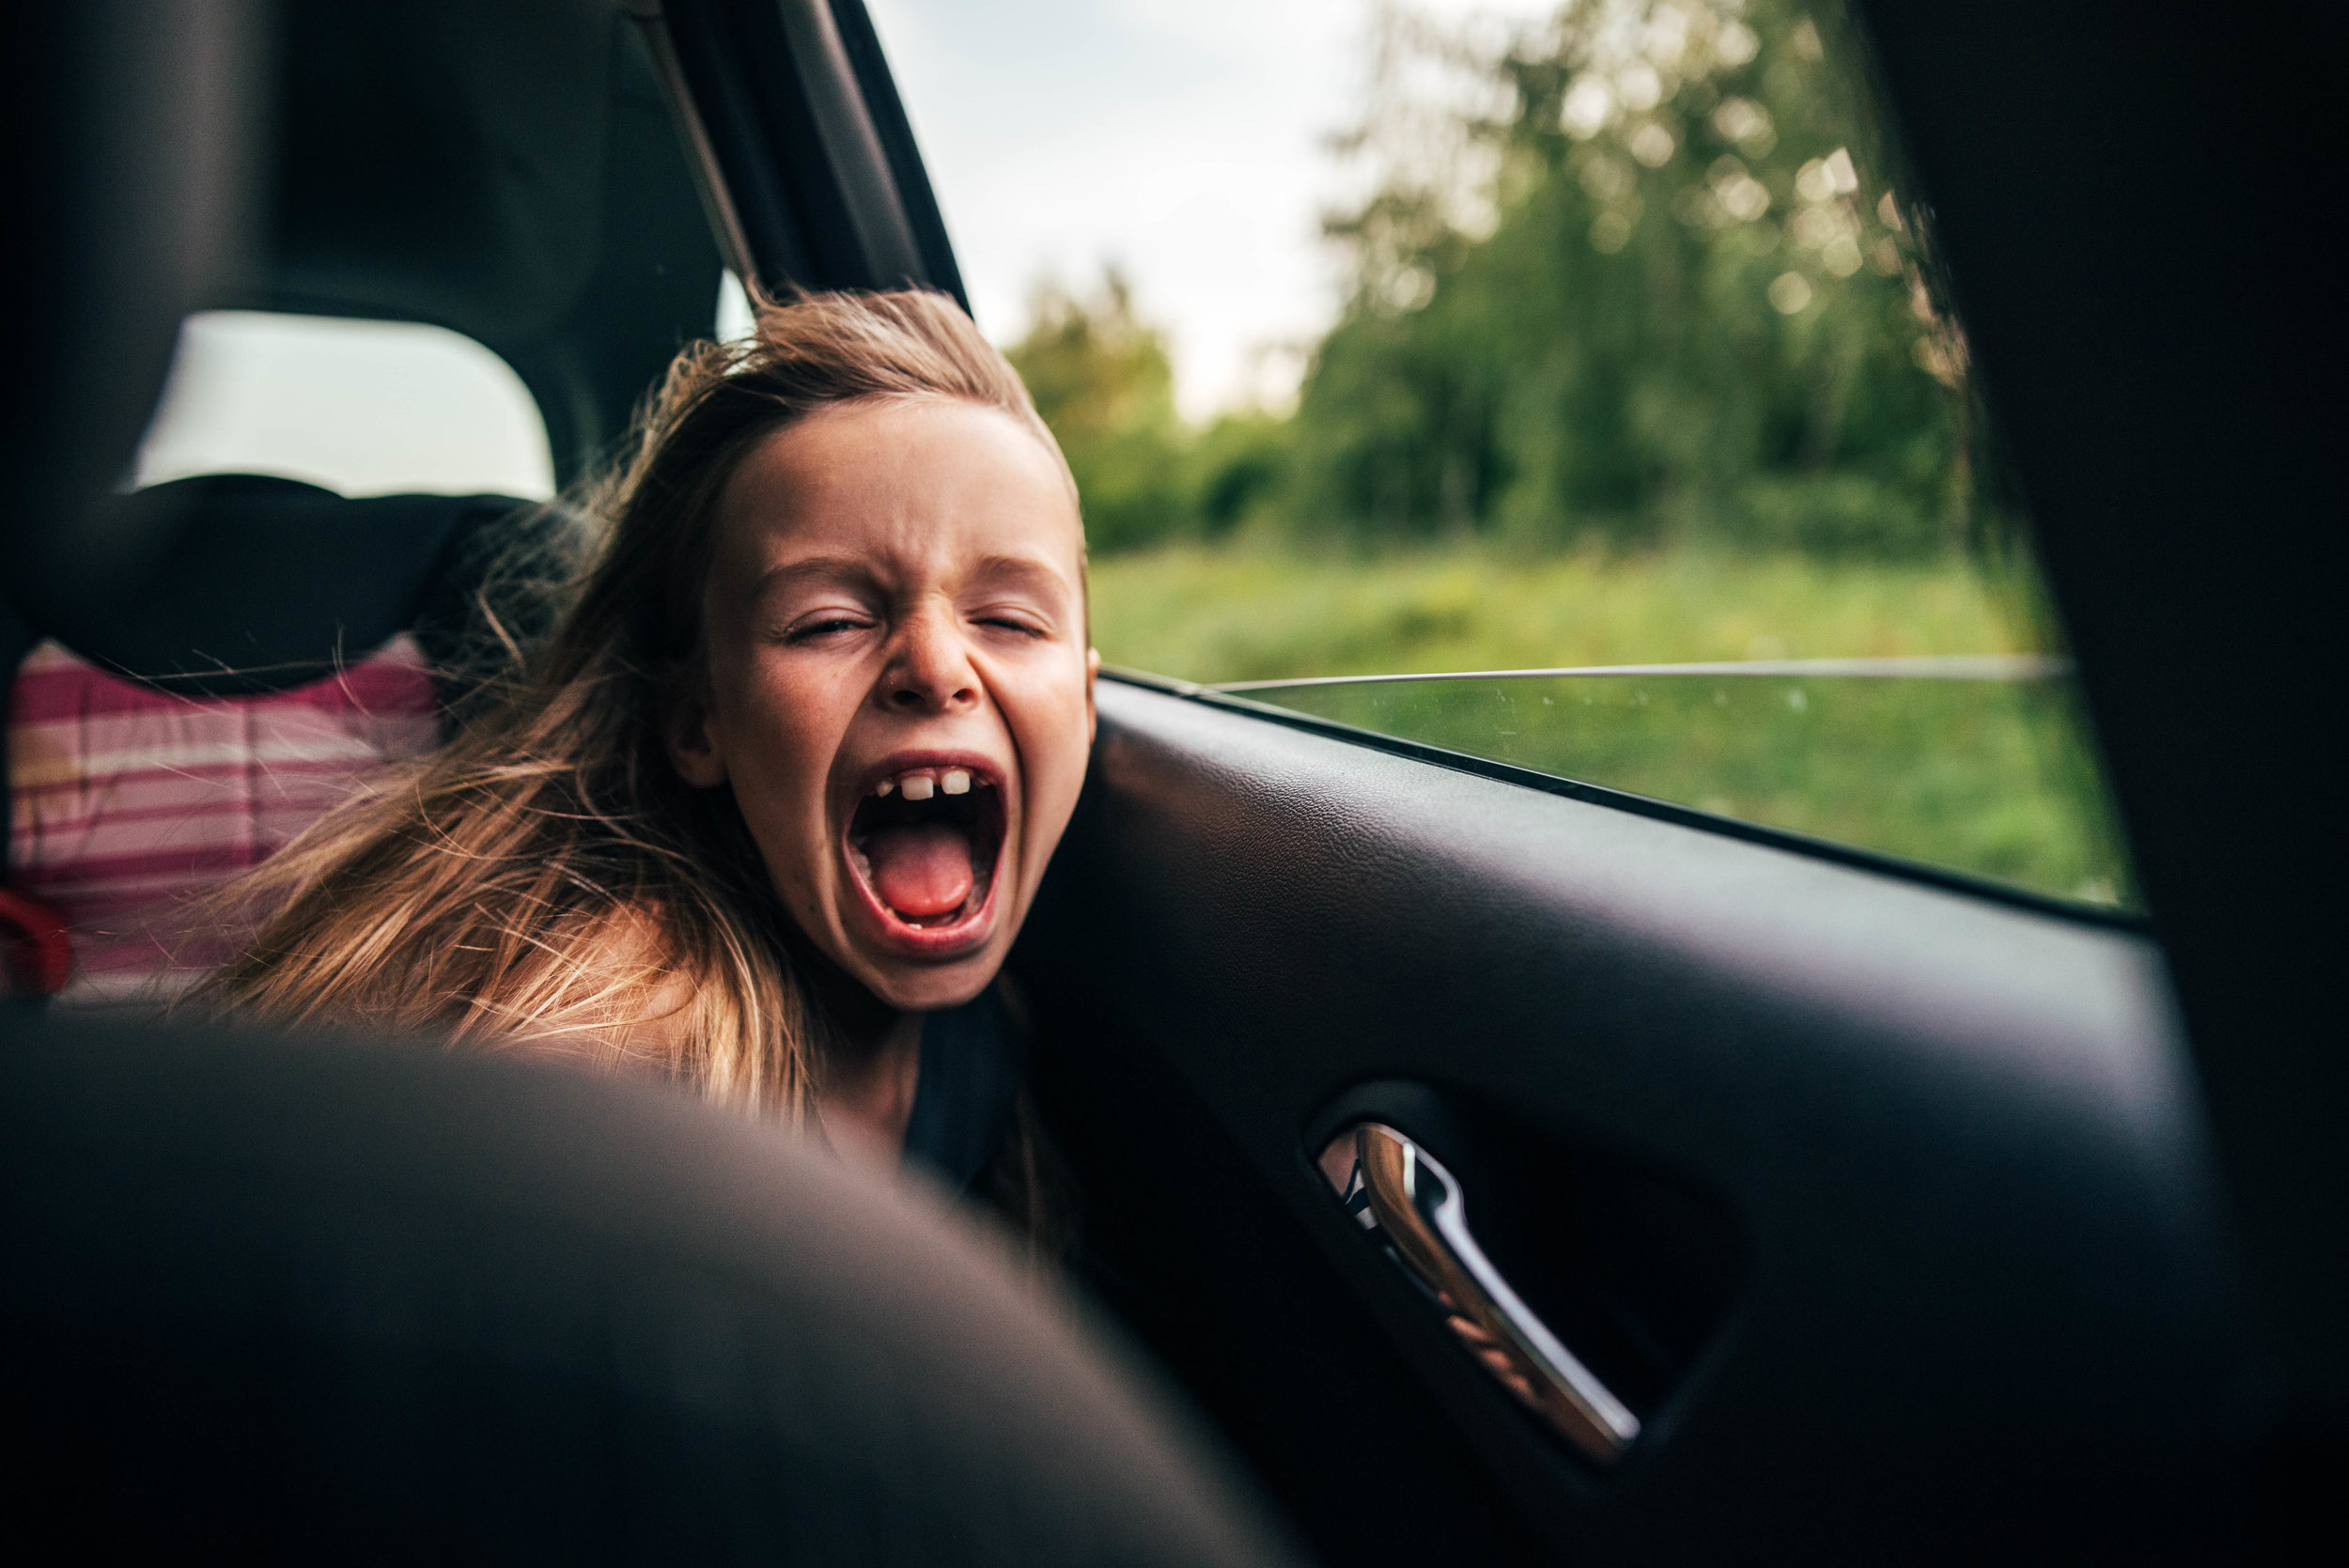 Young girl enjoys breeze in back of car Essex UK Documentary Portrait Photographer